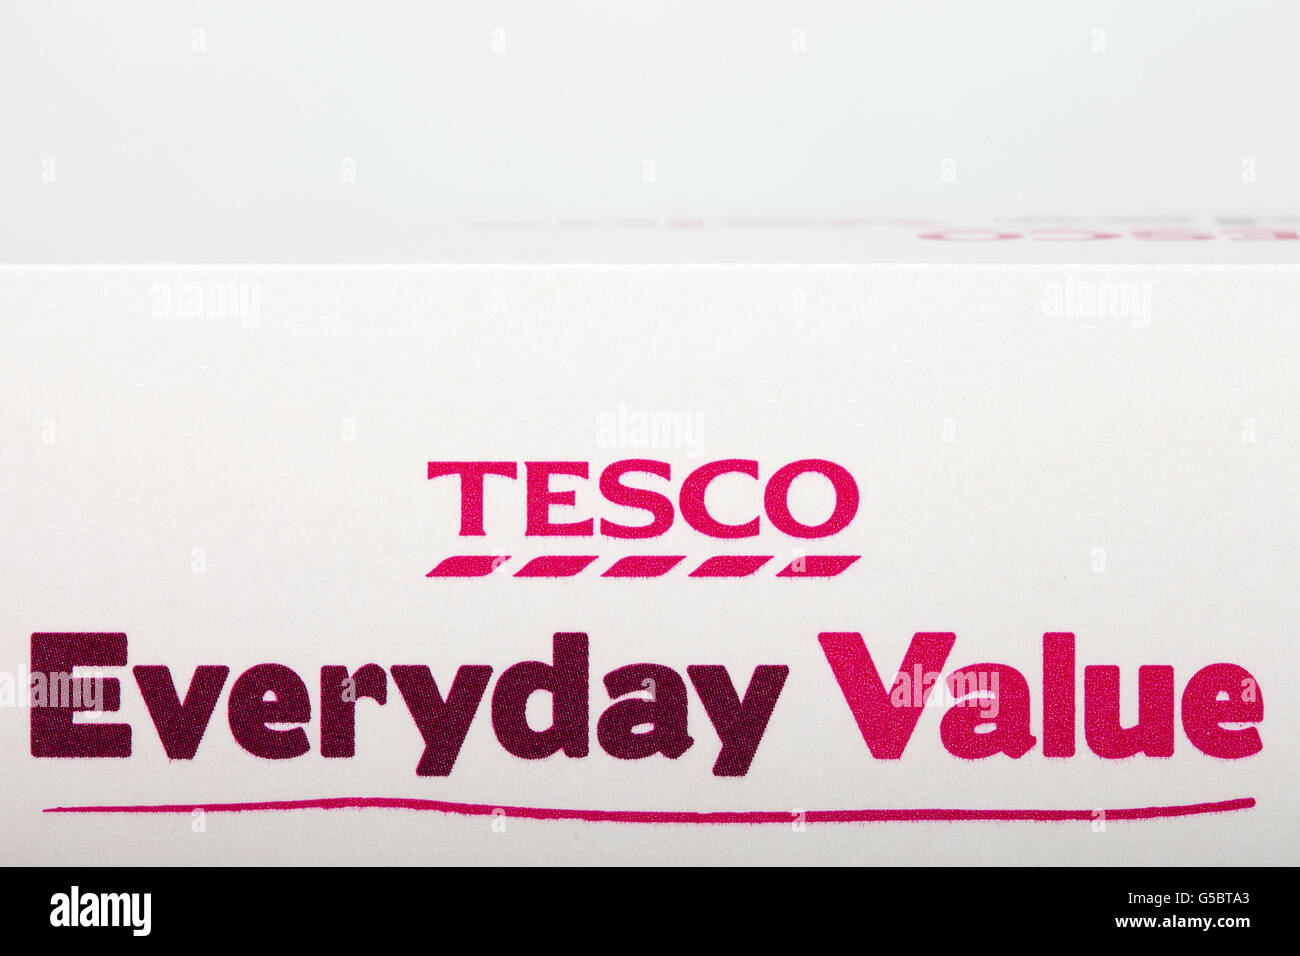 LONDON, UK - JUNE 16TH 2016: Close-up of the Tesco Everyday Value logo on one of their food products, on 16th June 2016.  It is Stock Photo